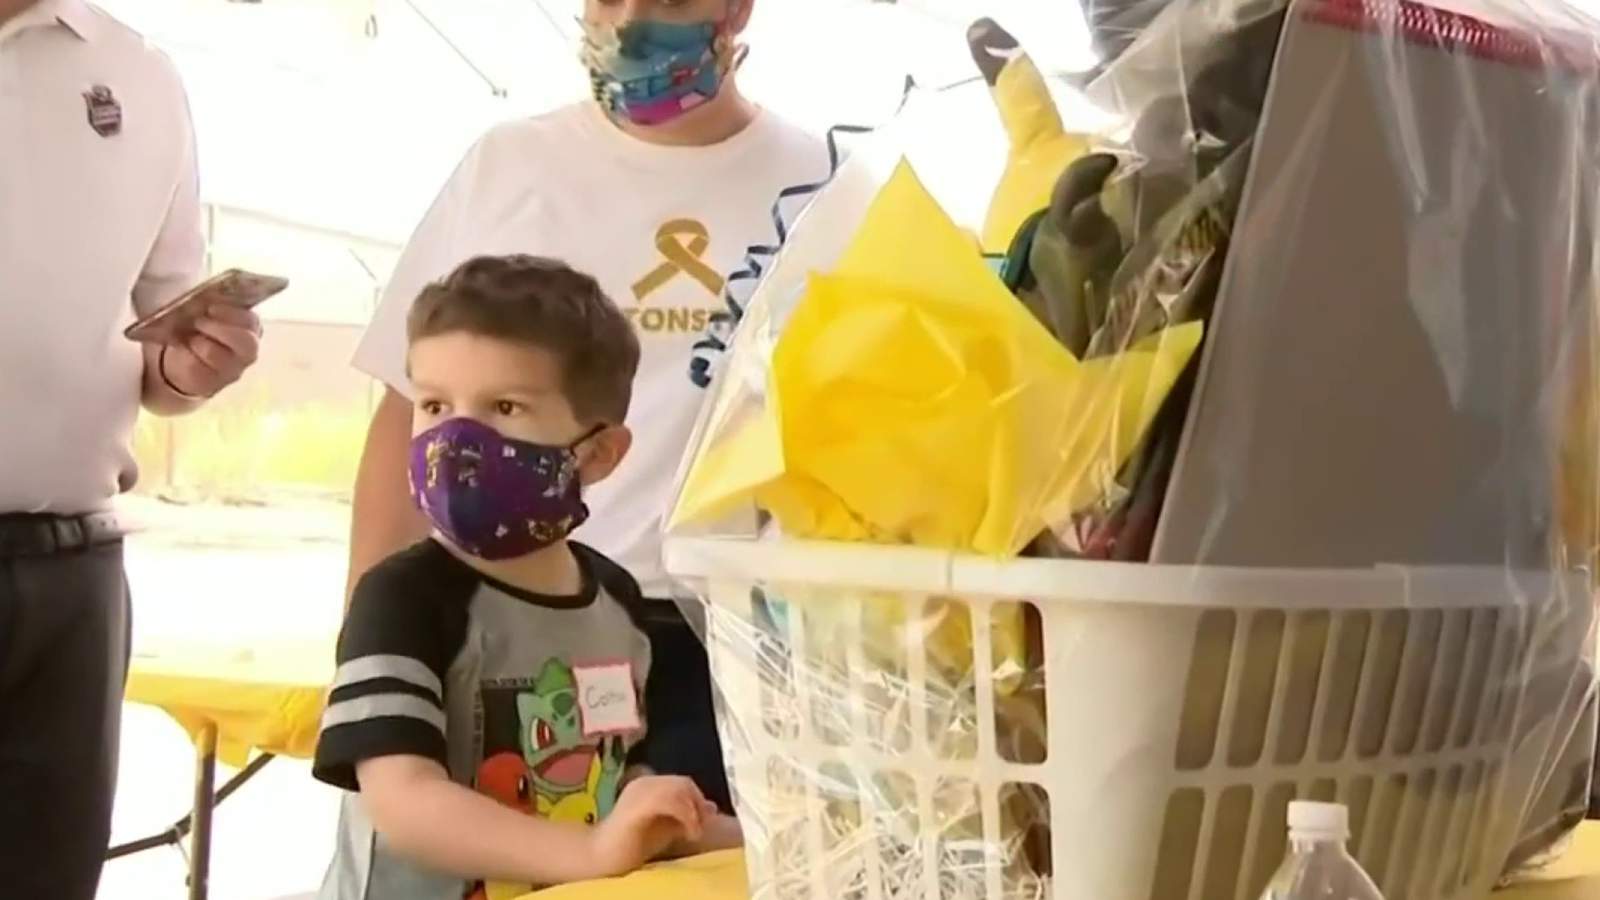 Bottomless Toy Chest honors children fighting cancer with parking lot celebration